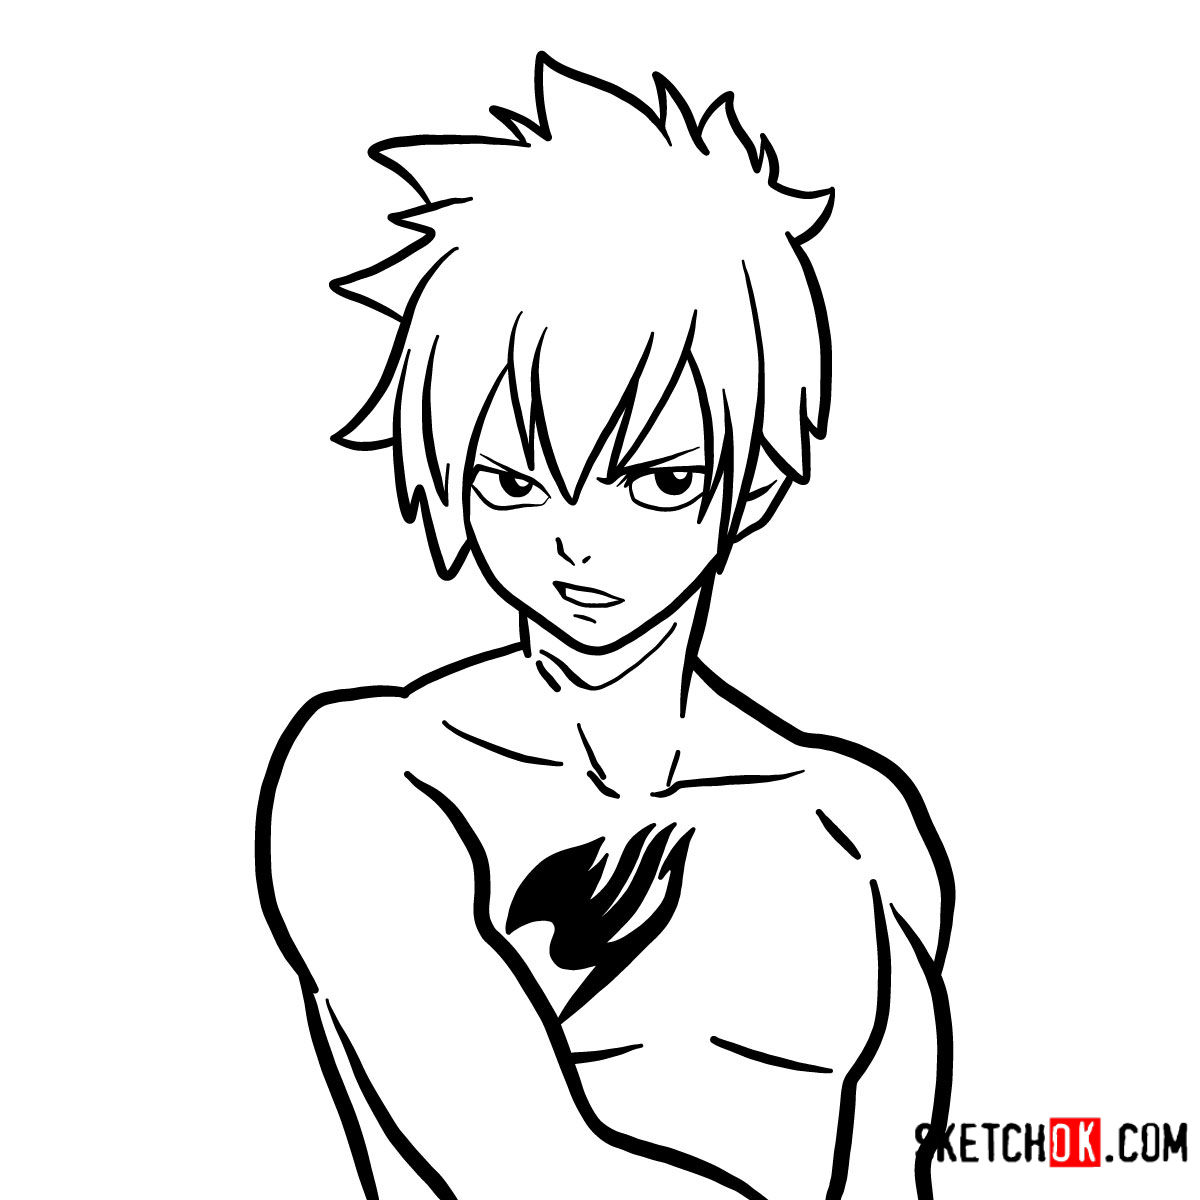 How to draw Gray Fullbuster's face | Fairy Tail